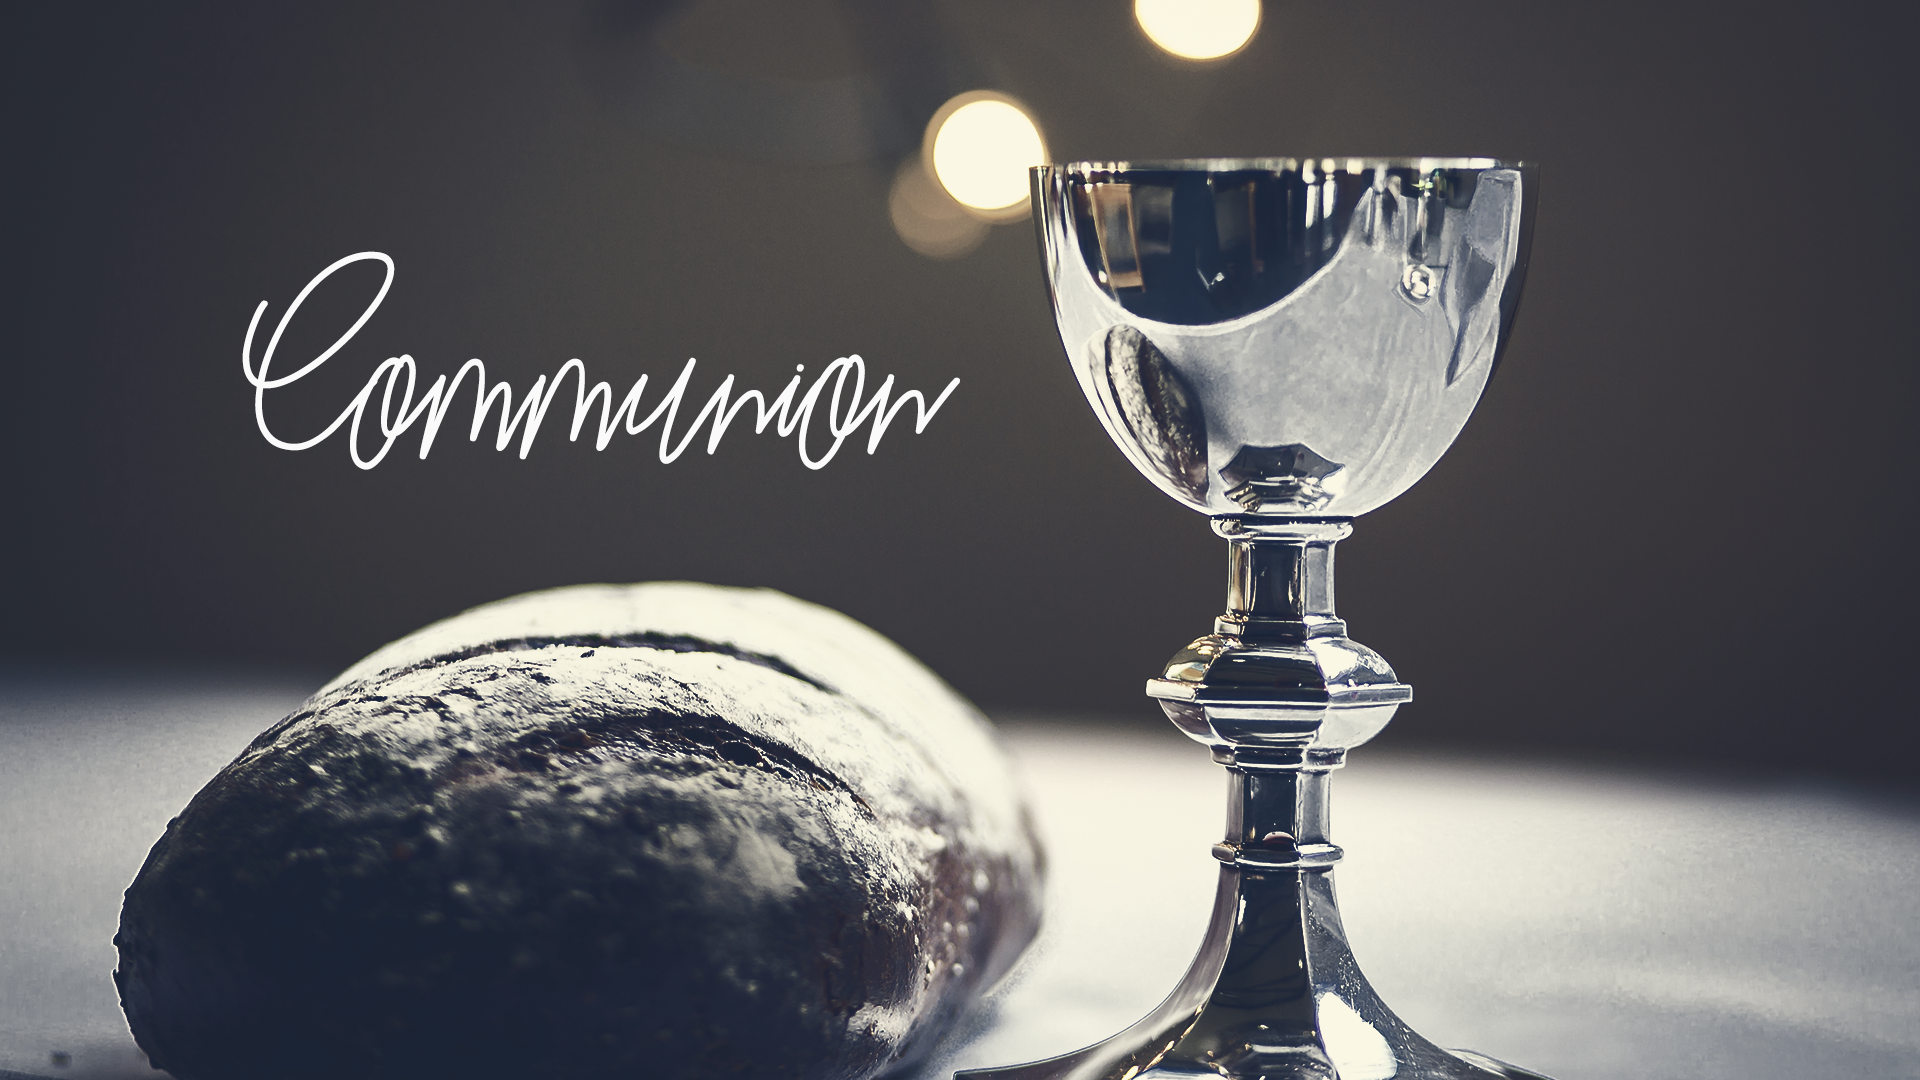 Communion bread and cup